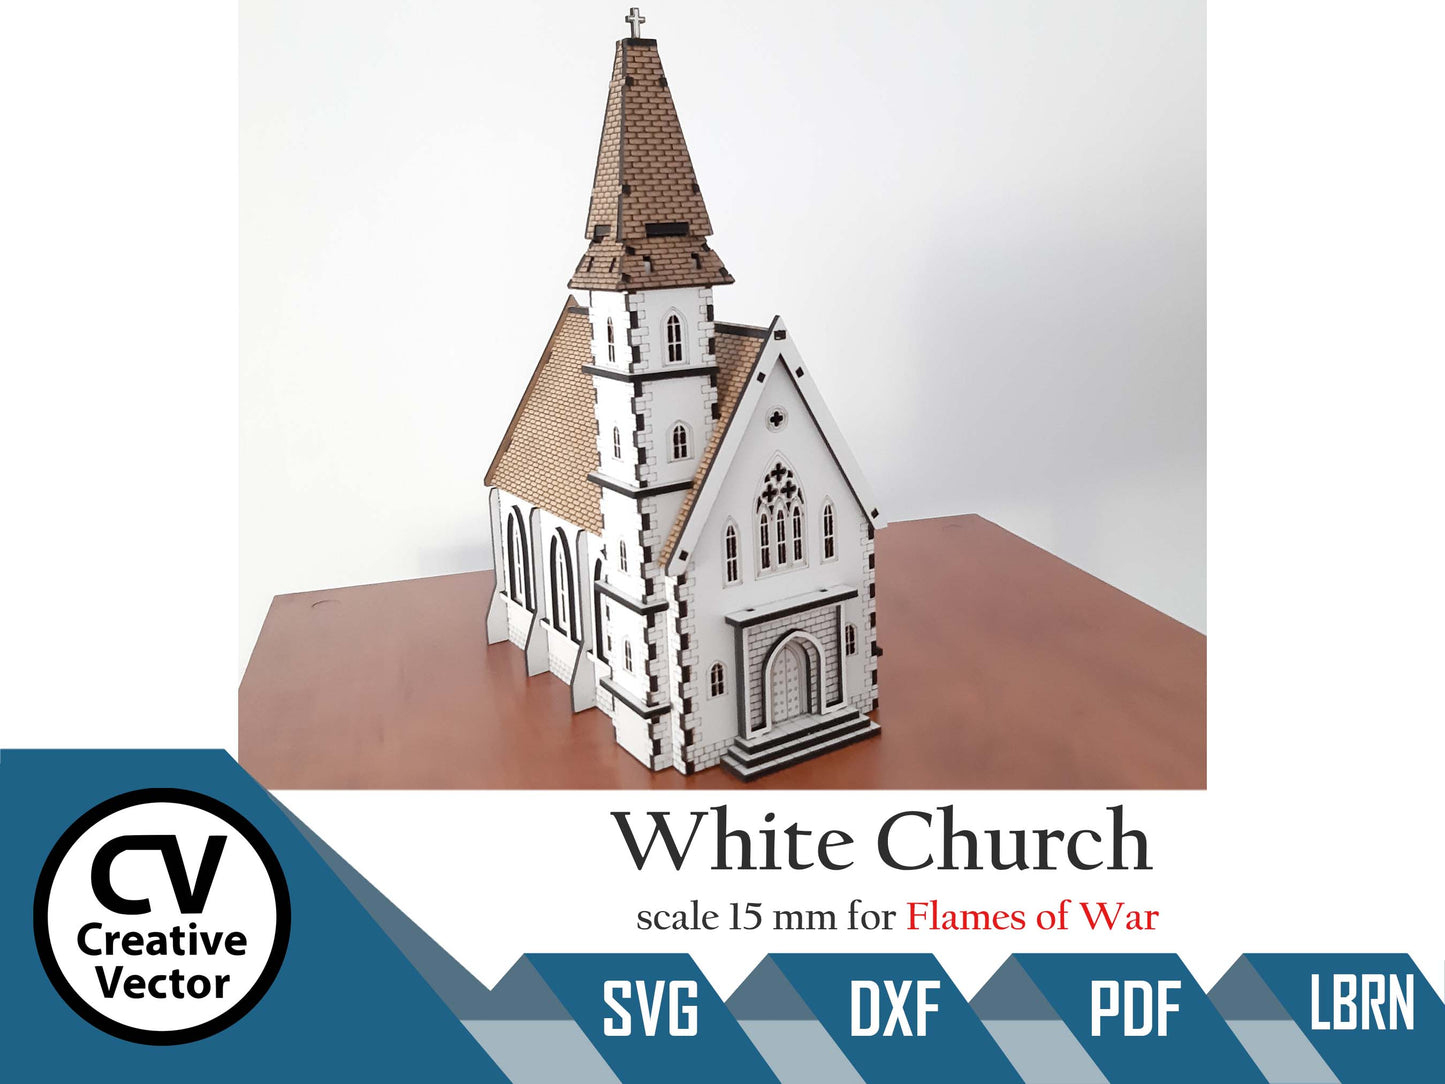 White Church in scale 15mm (1:100 / 1:87 / H0) for game Flames of War